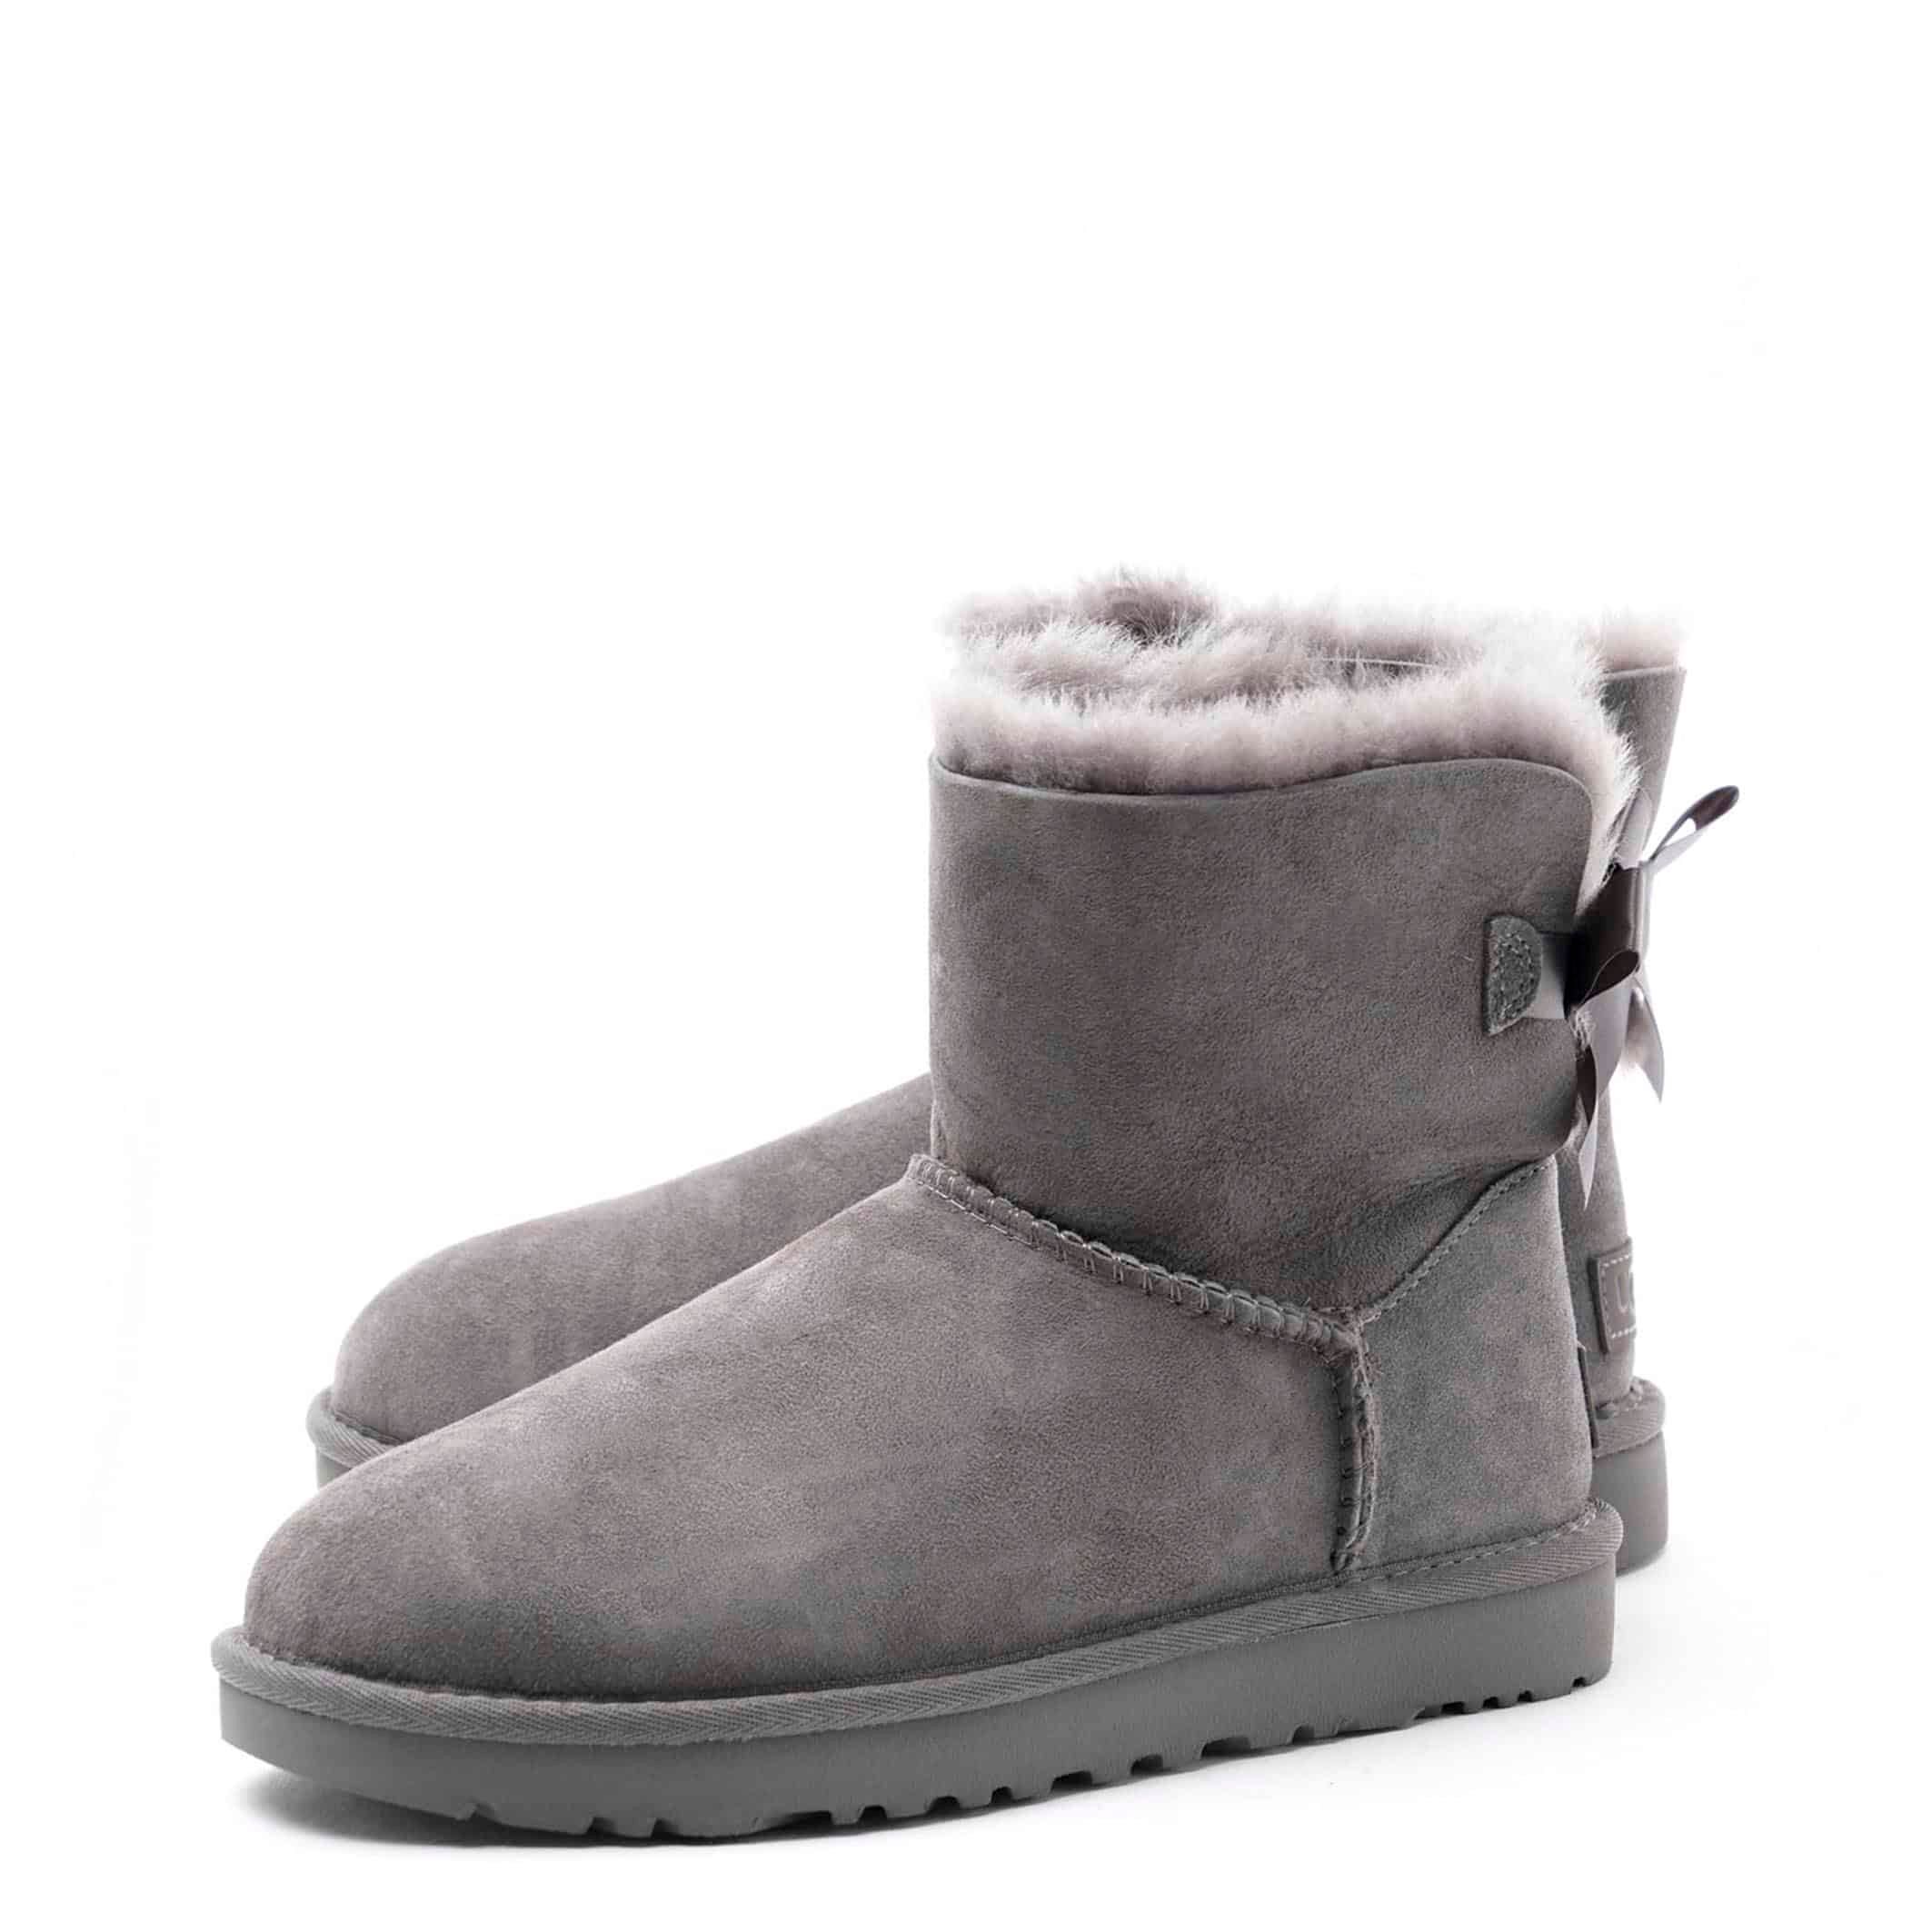 UGG - MINI-BAILEY- BOW-II_1016501 • Grey • Ankle boots, Shoes, Women